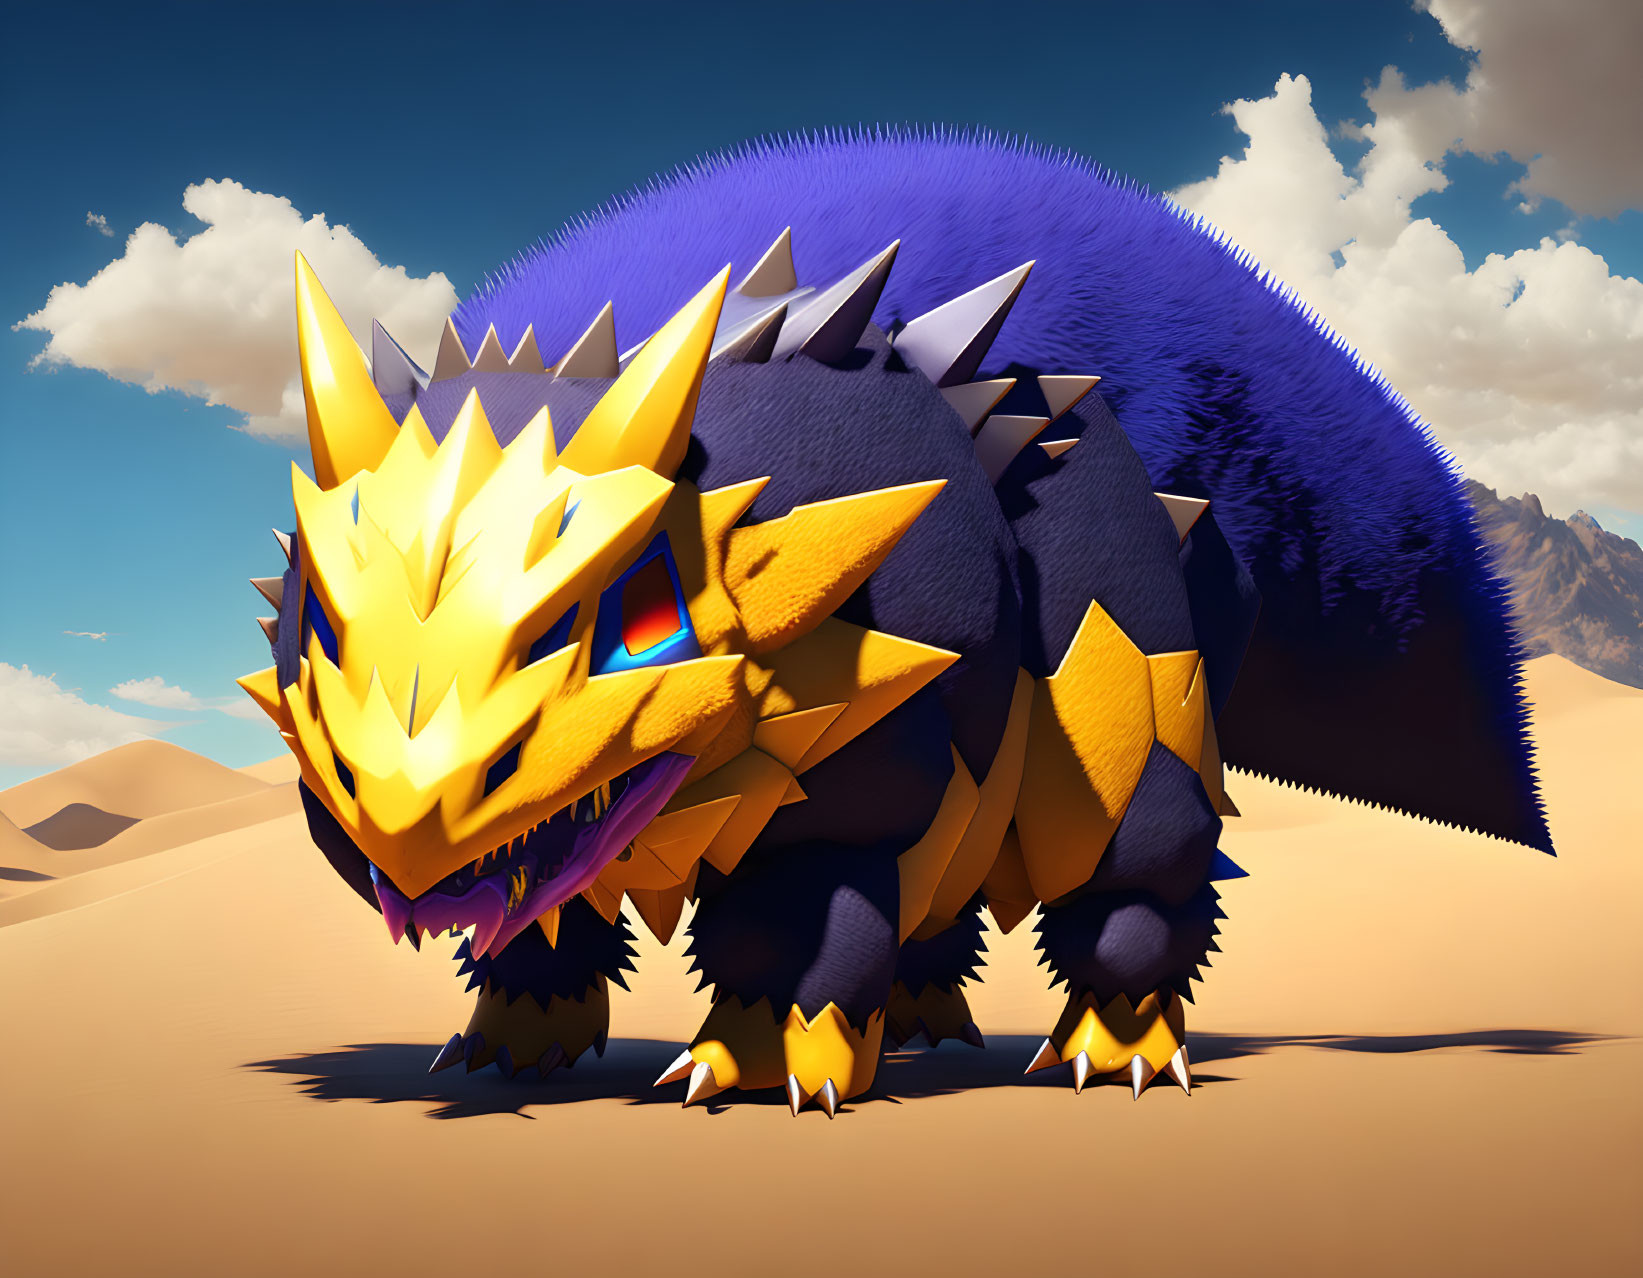 Fictional spiky creature in blue and yellow against desert backdrop